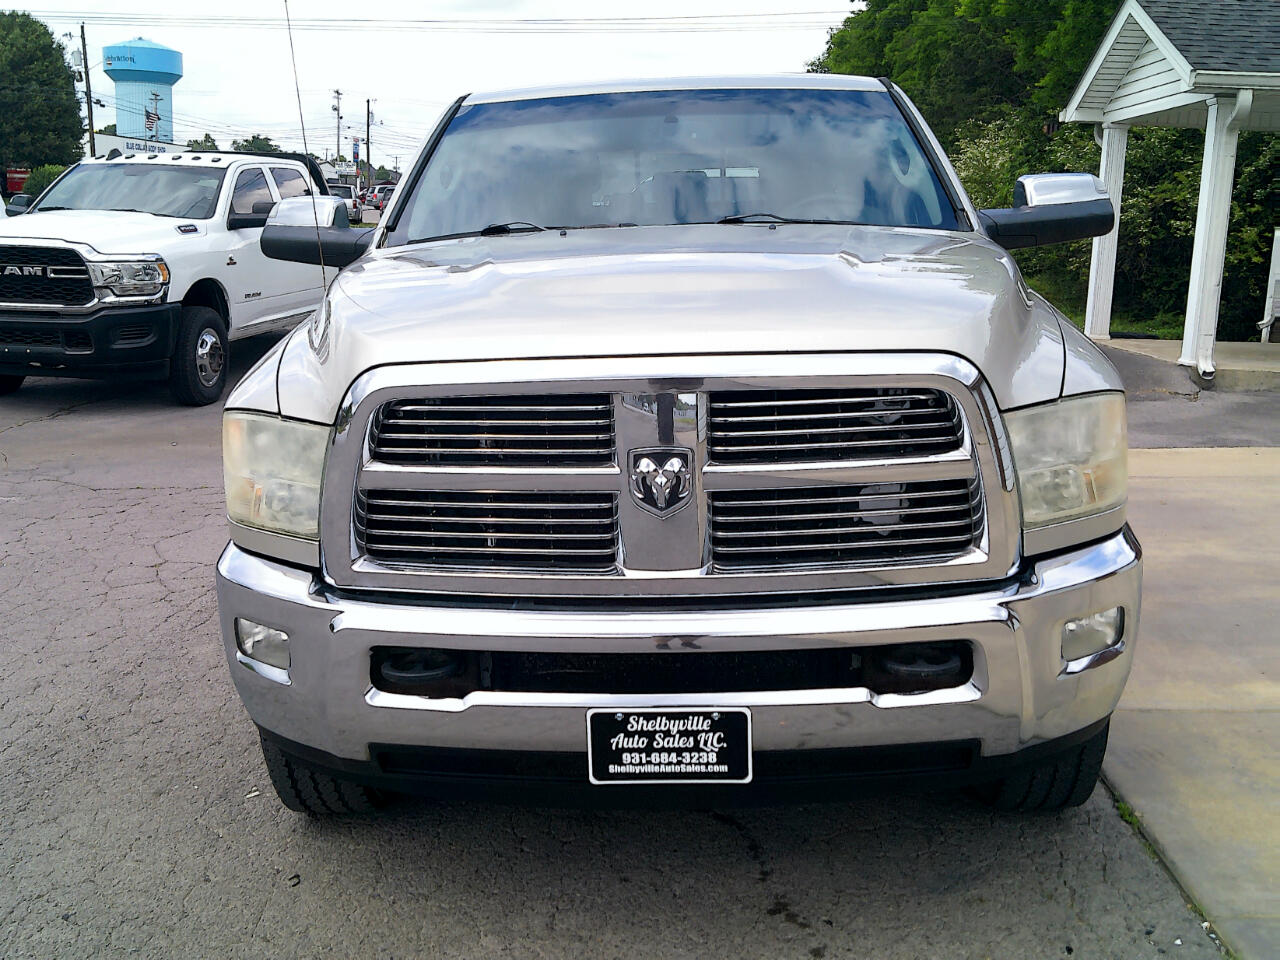 2010 Dodge Ram 2500 WE PRICE OUR VEHICLES TO SELLPLEASE CALL TO CONFIRM AVAILABILITY BEFORE YOU M